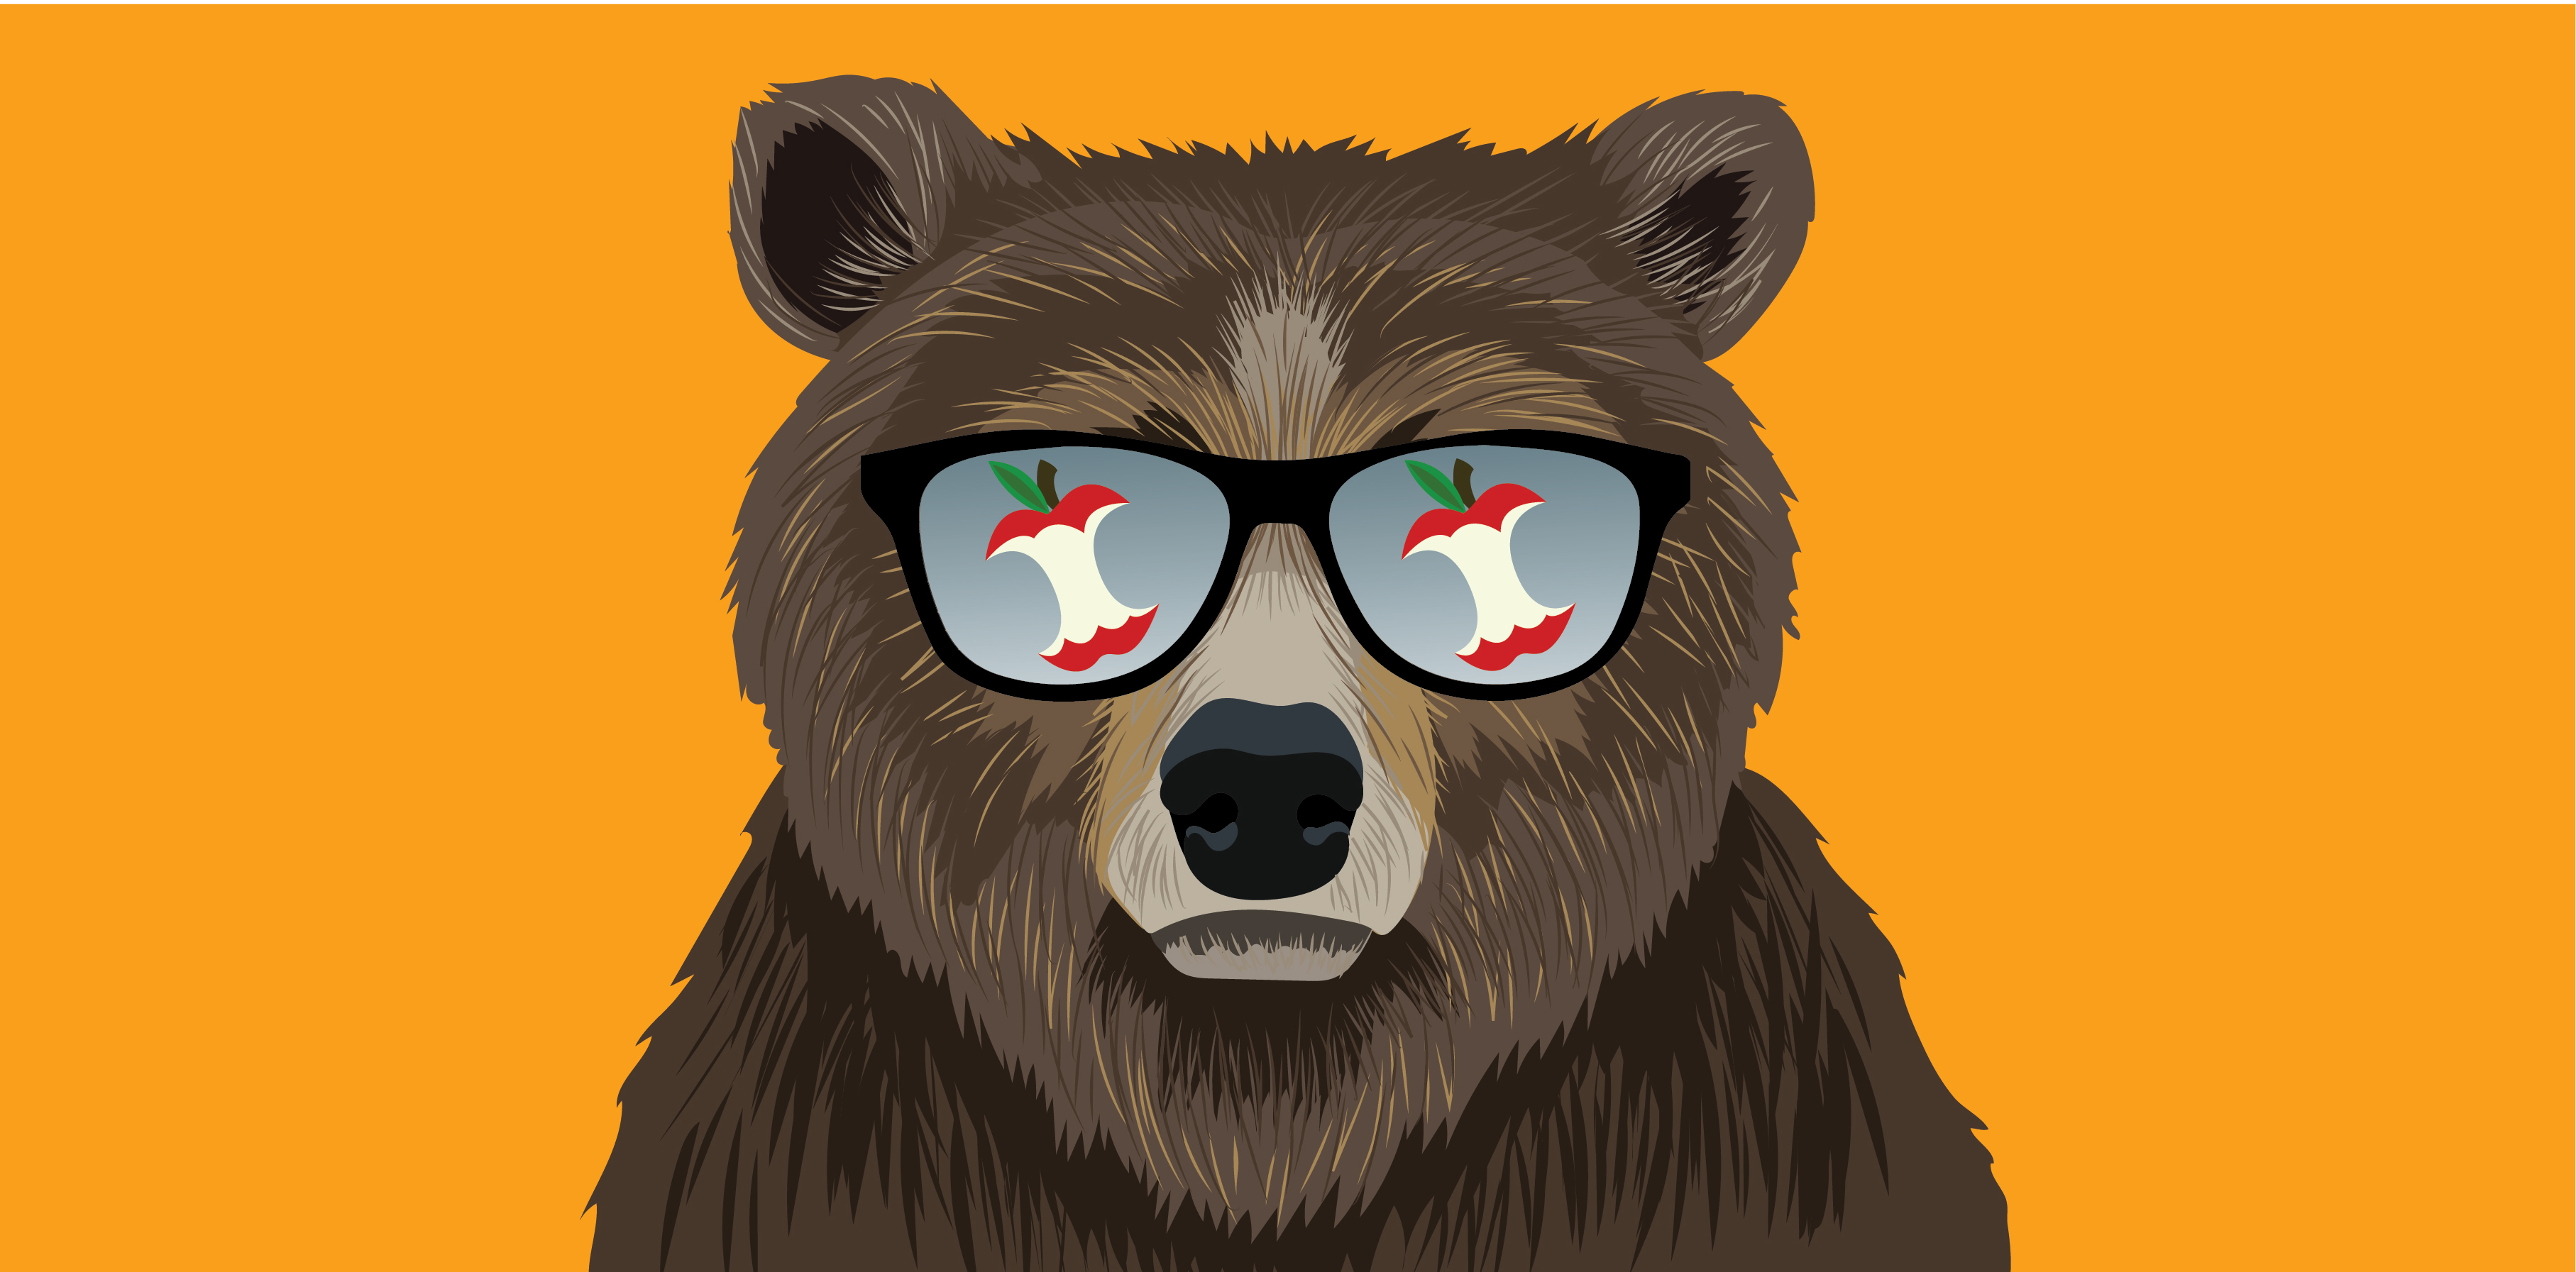 Drawing of a bear wearing sunglasses on an orange background. An apple core is in the reflection of the sunglasses.